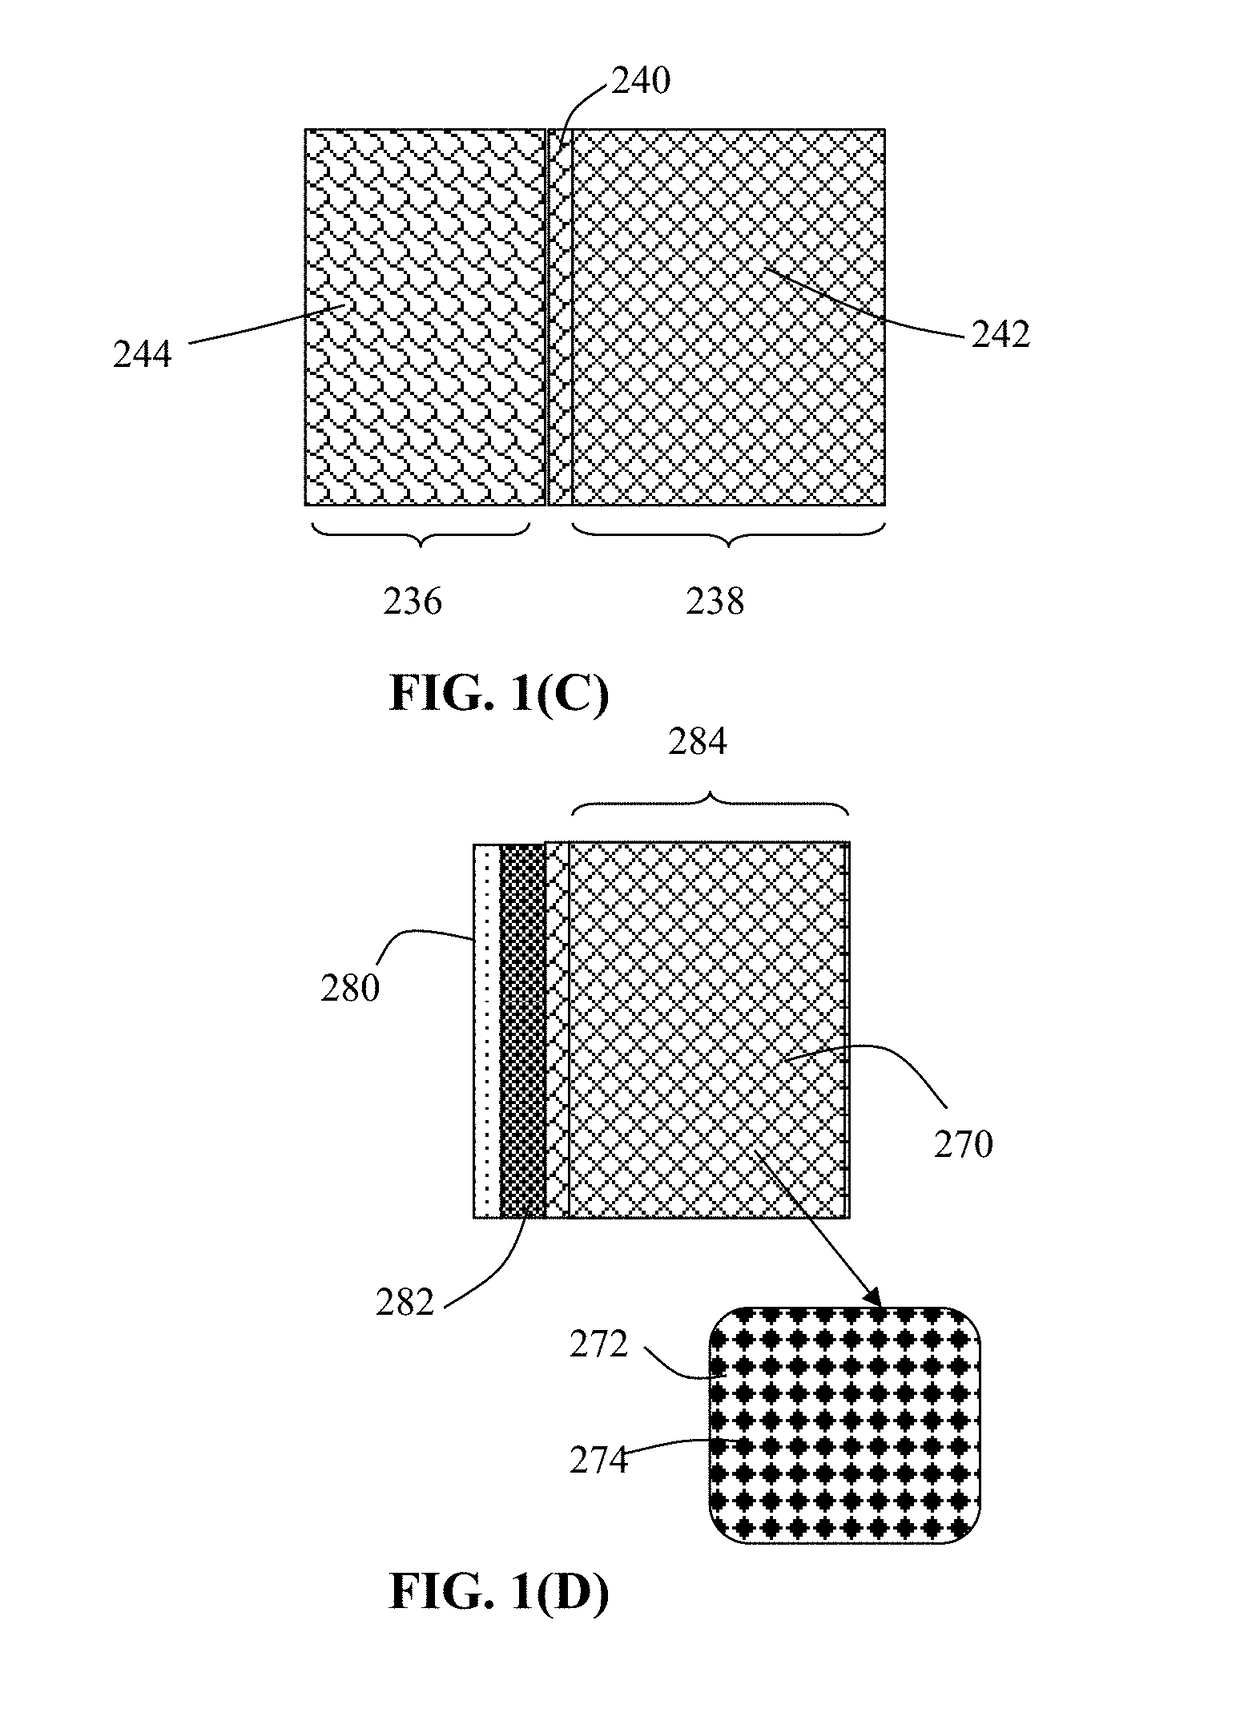 Shape-Conformable Alkali Metal Battery Having a Conductive and Deformable Quasi-solid Polymer Electrode